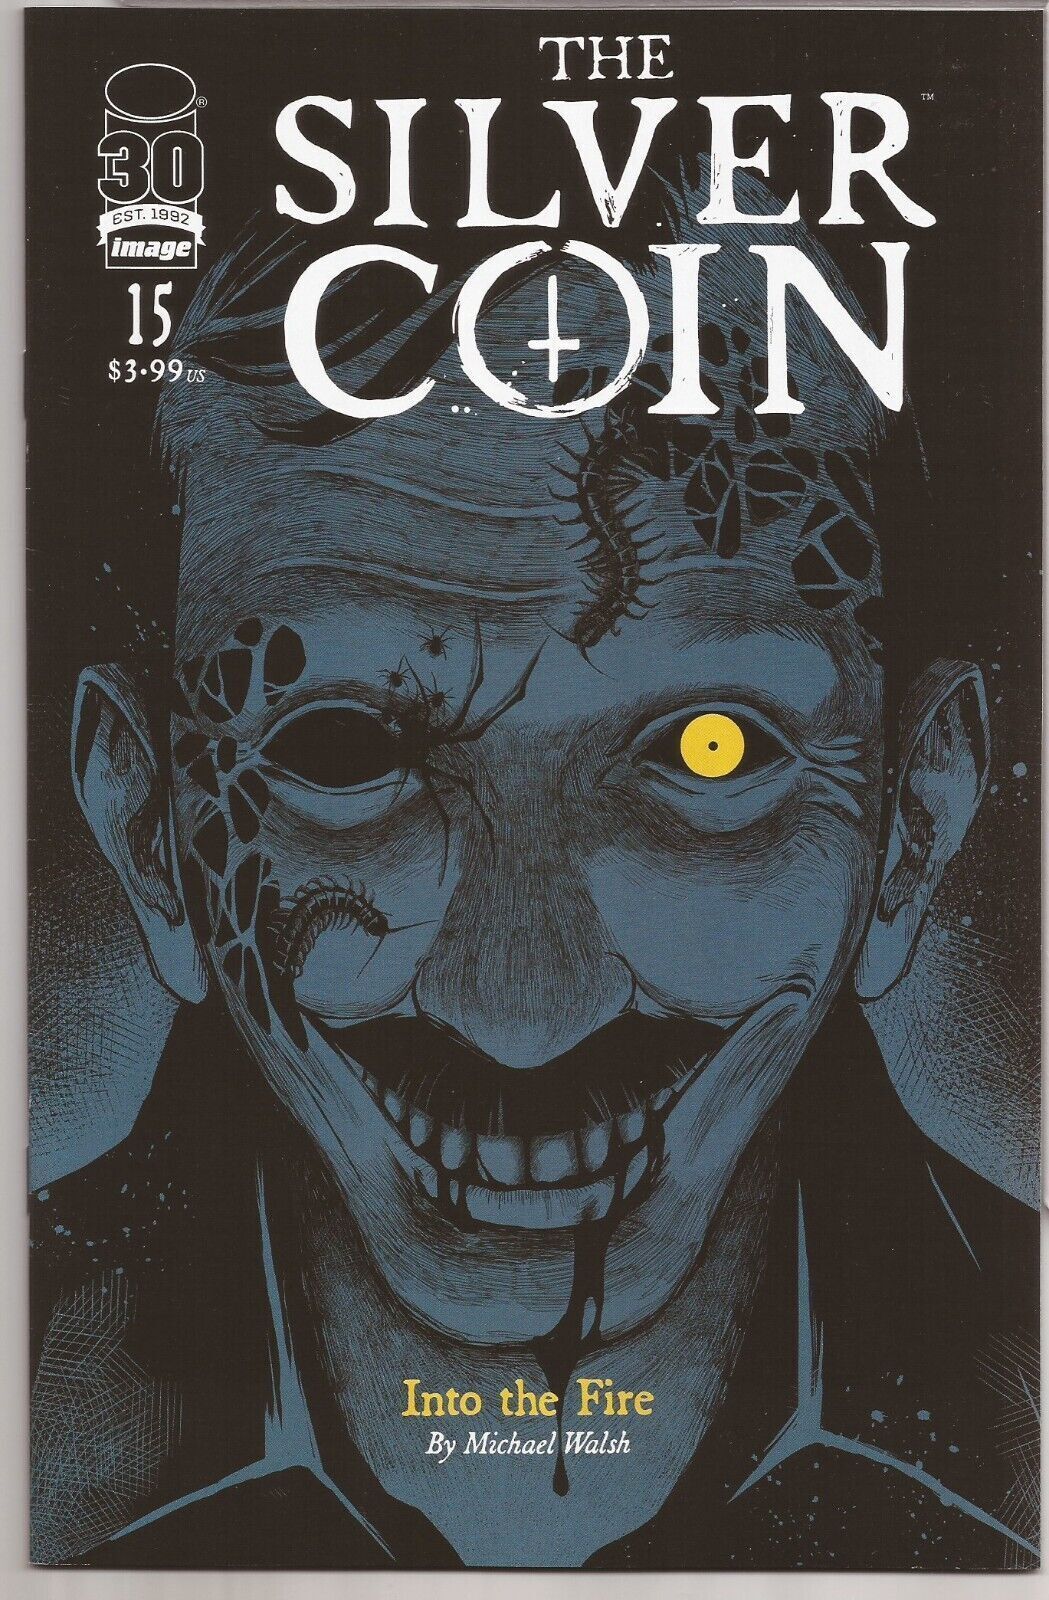 SILVER COIN #15 - INTO THE FIRE ANWITA CITIRYA VARIANT - COVER B